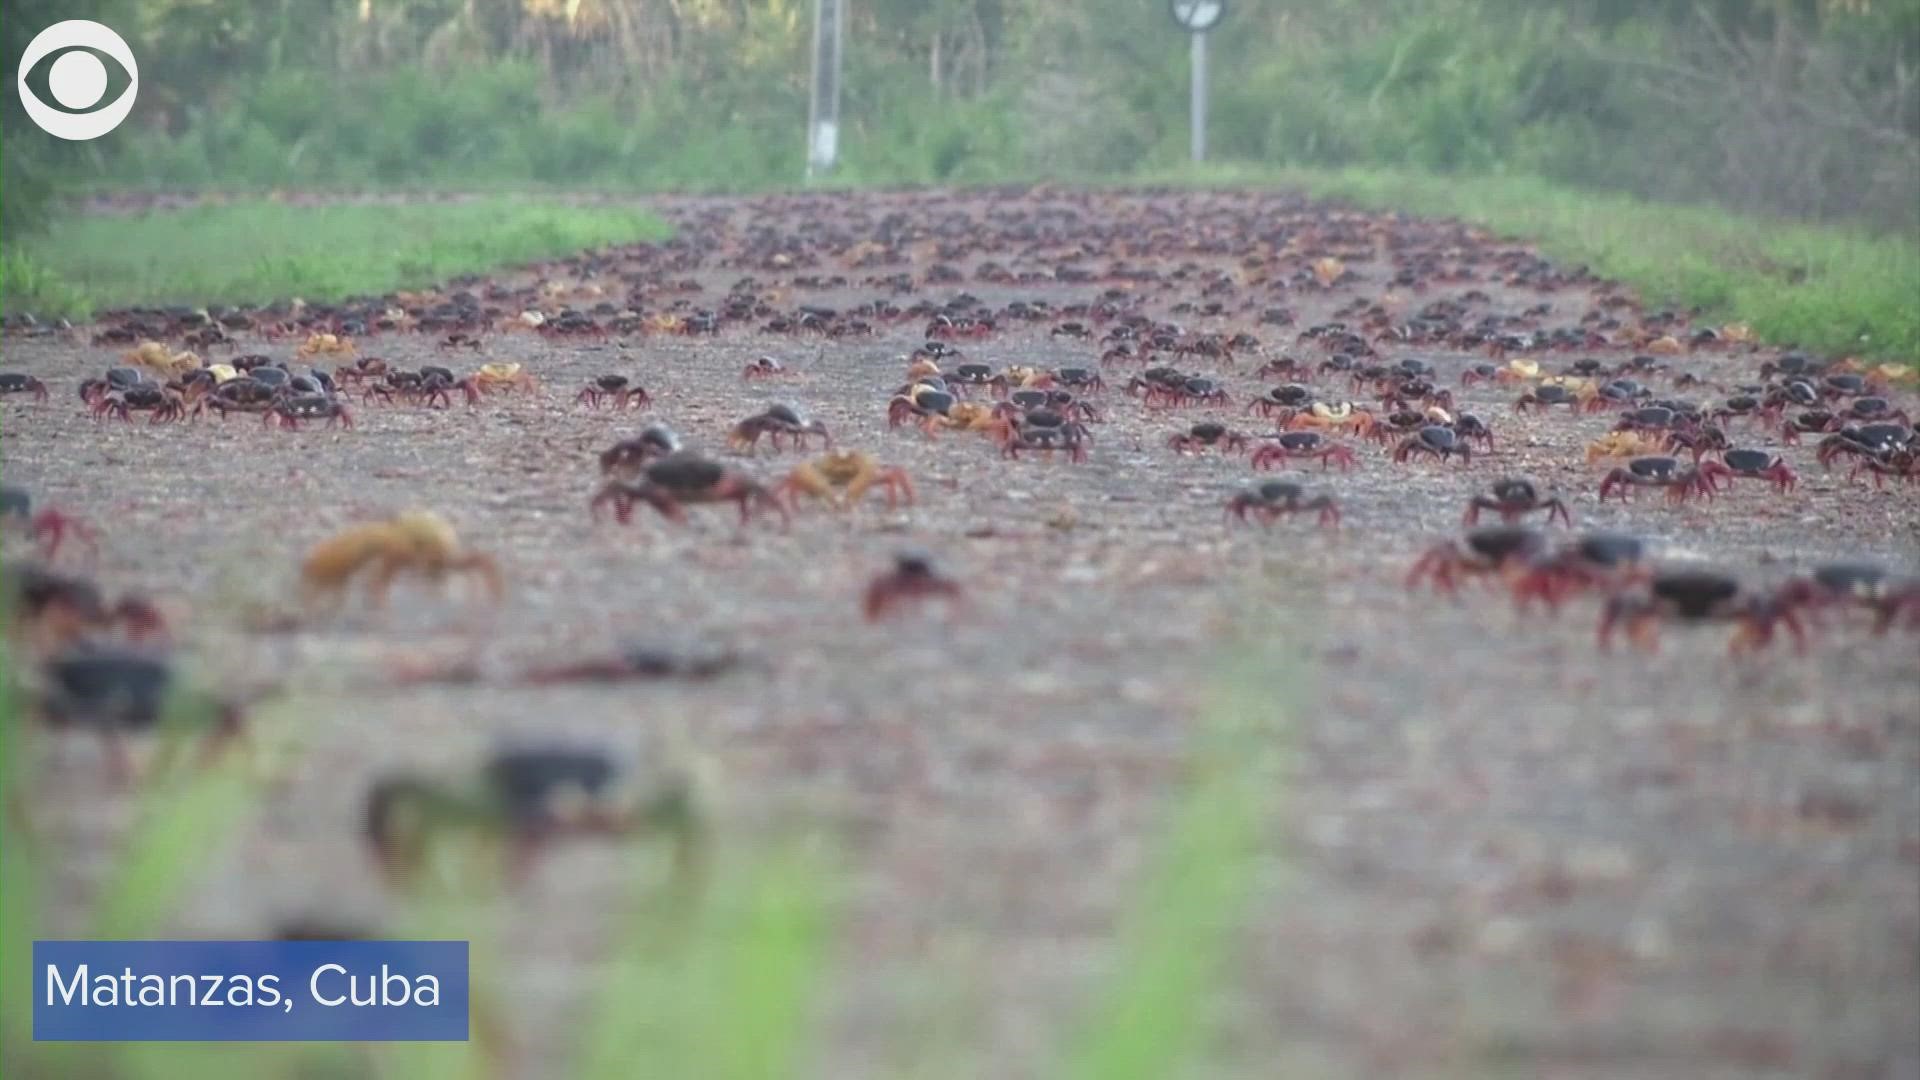 Take a look at all of these crabs moving through Matanzas, Cuba, on Thursday (3/24). They are making their way from the forest to the sea.